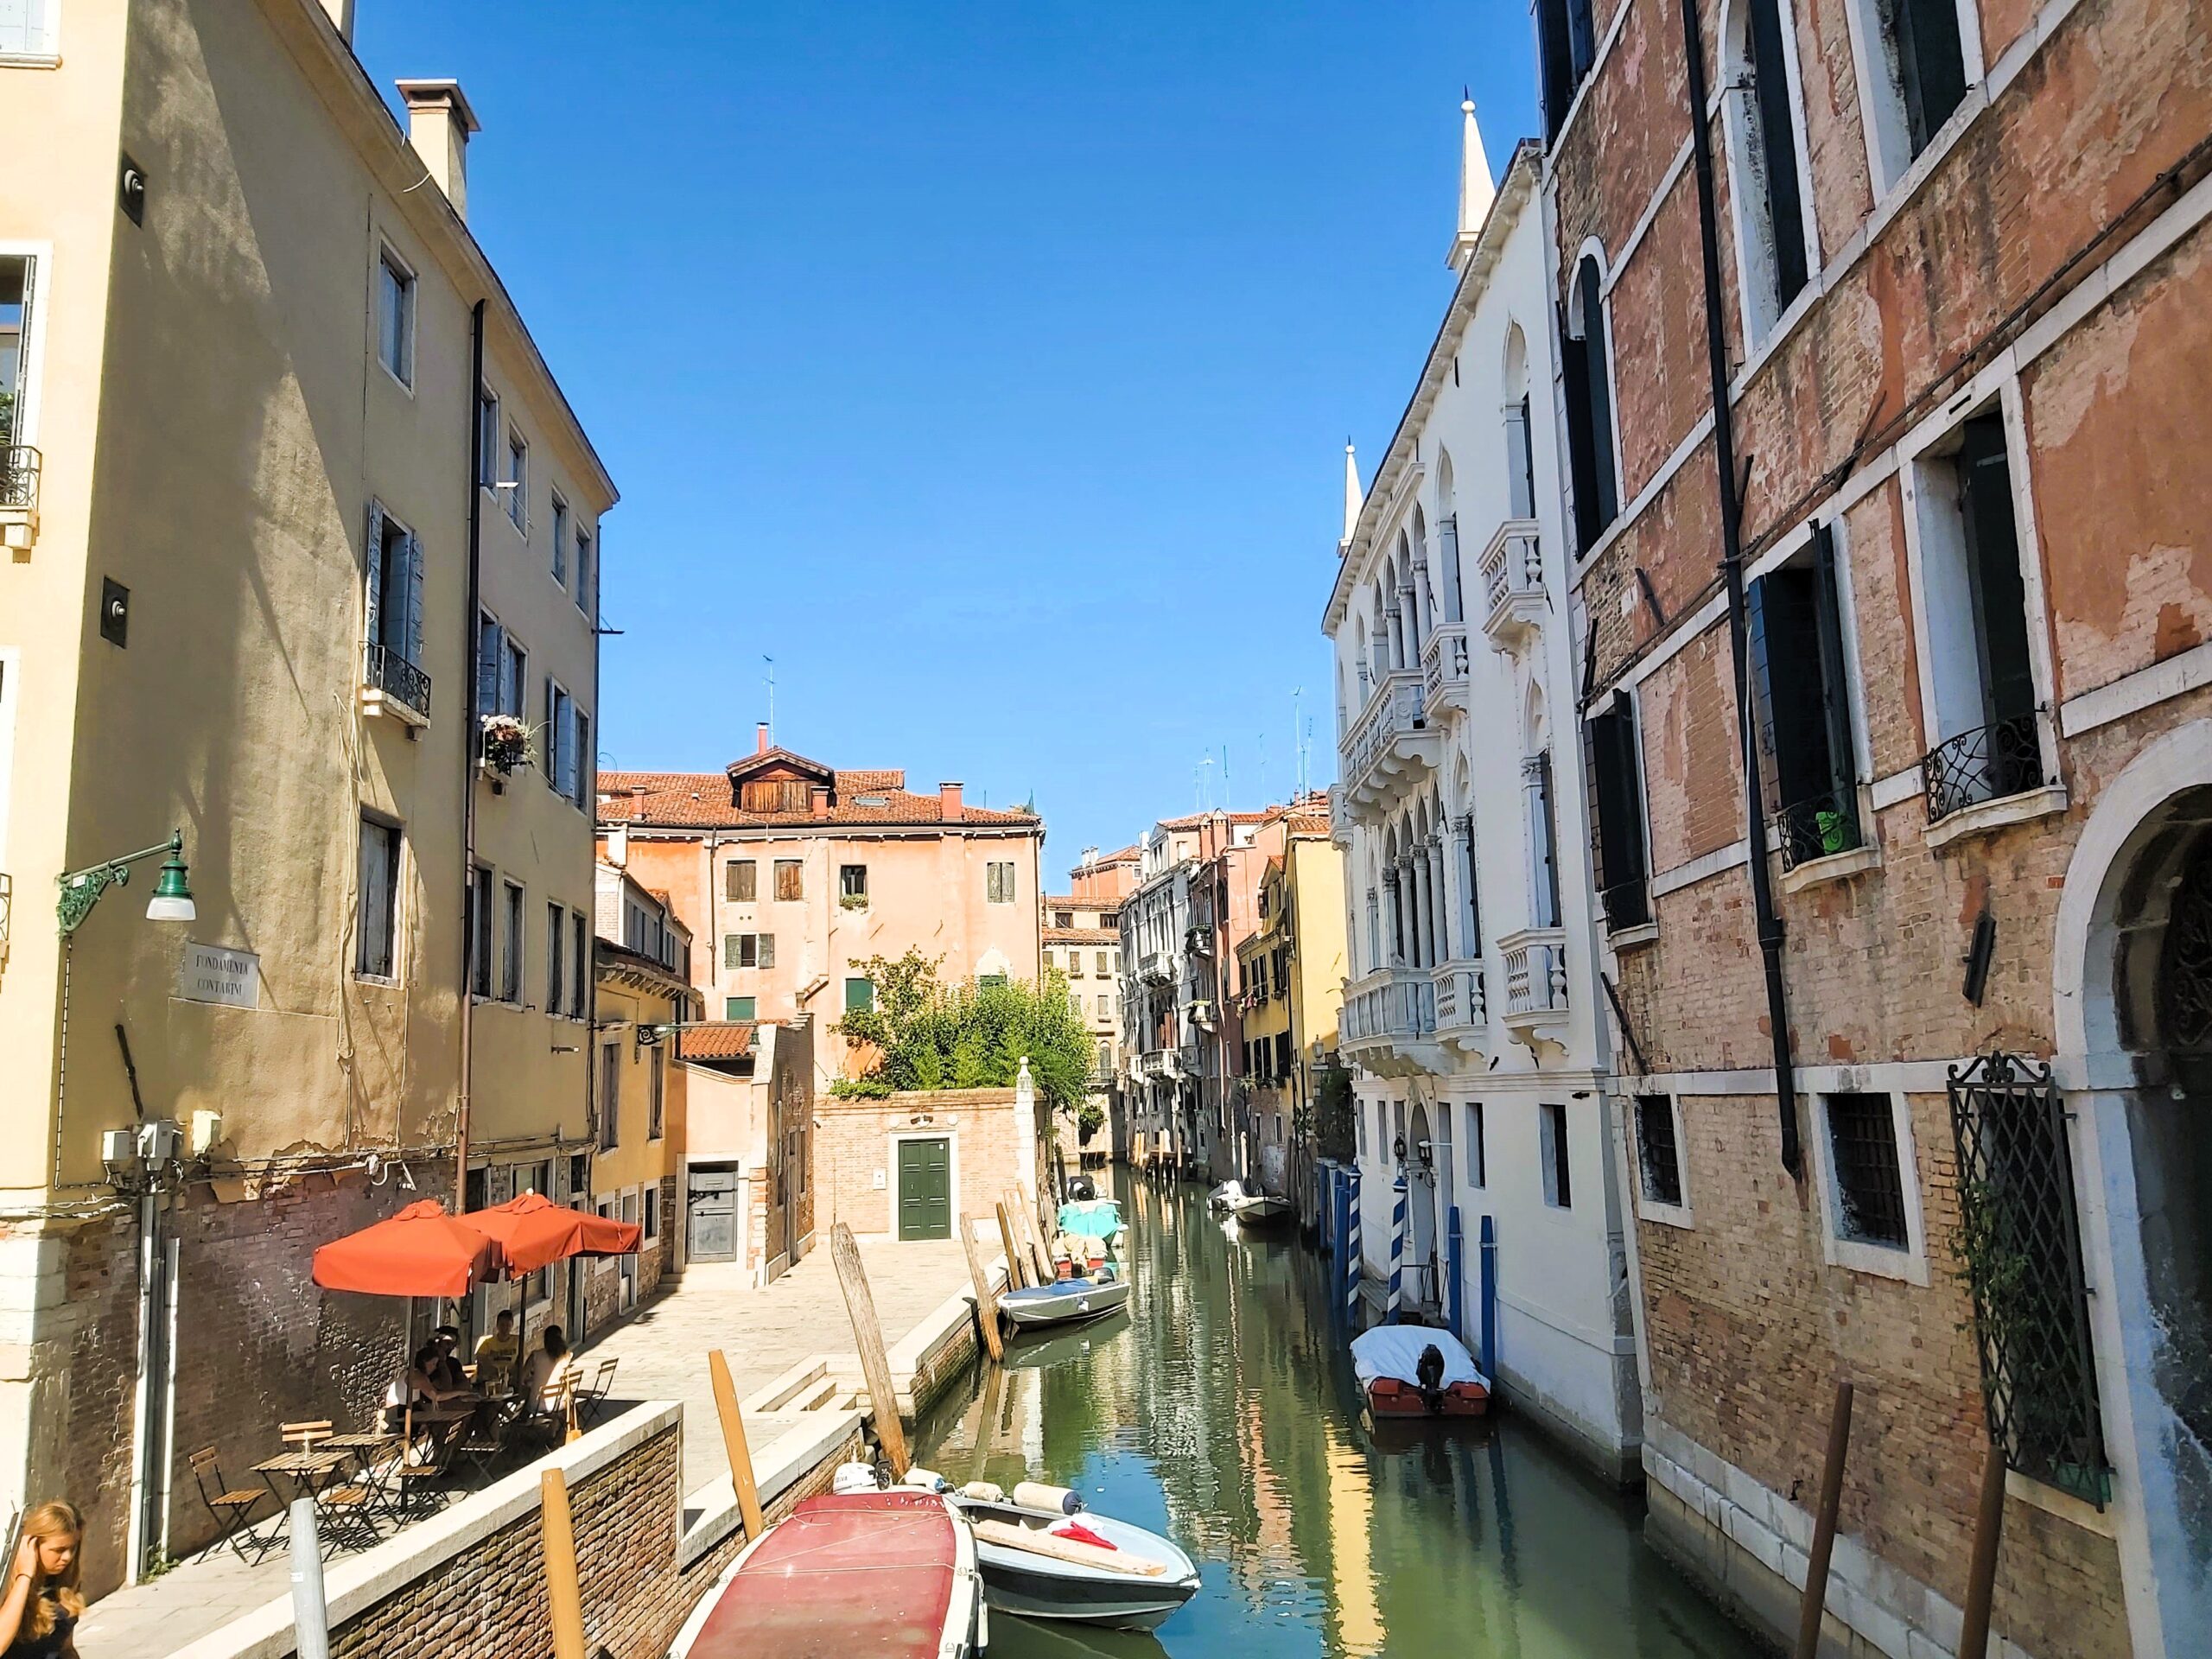 A colourful canal scene in summer in Venice, Italy